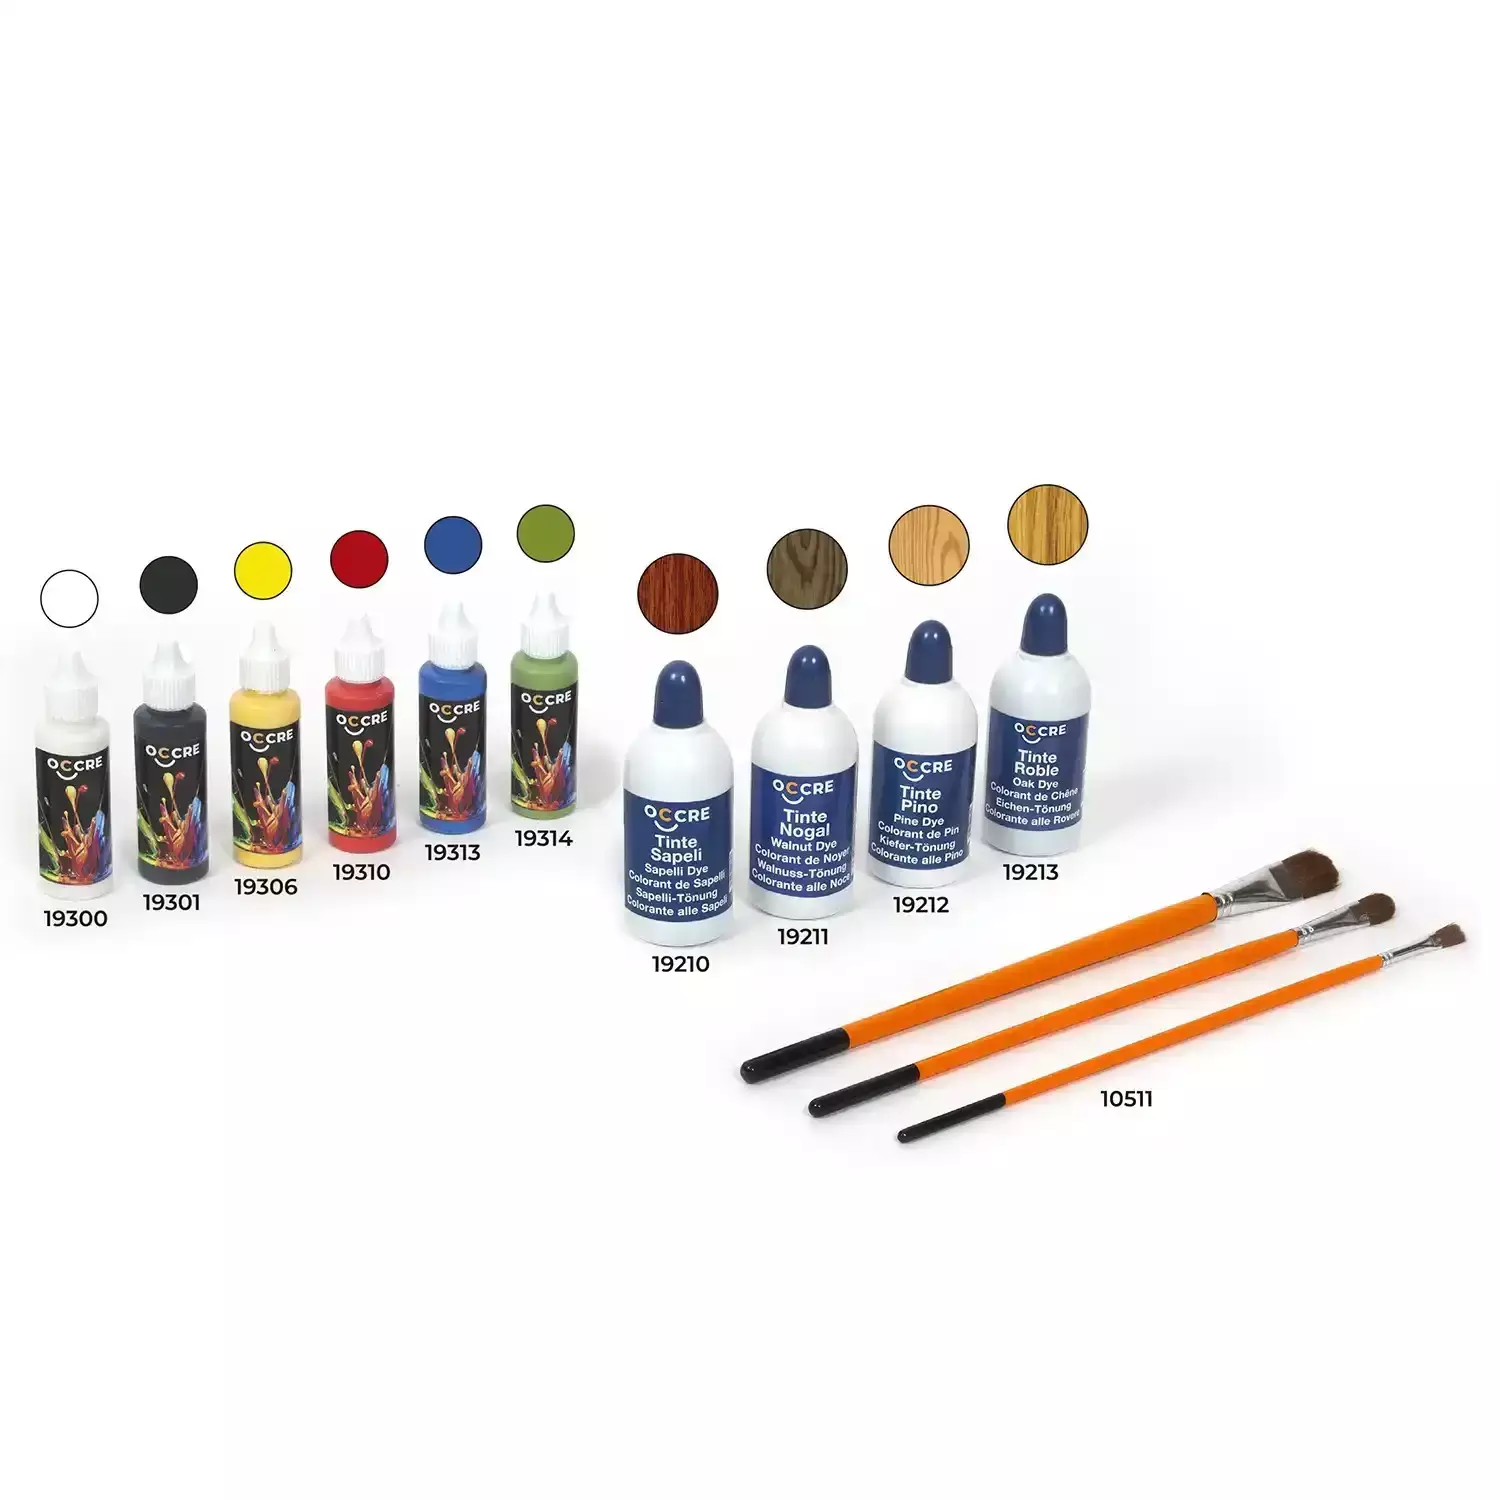 Basic paints, dye pack and brushes (90547)